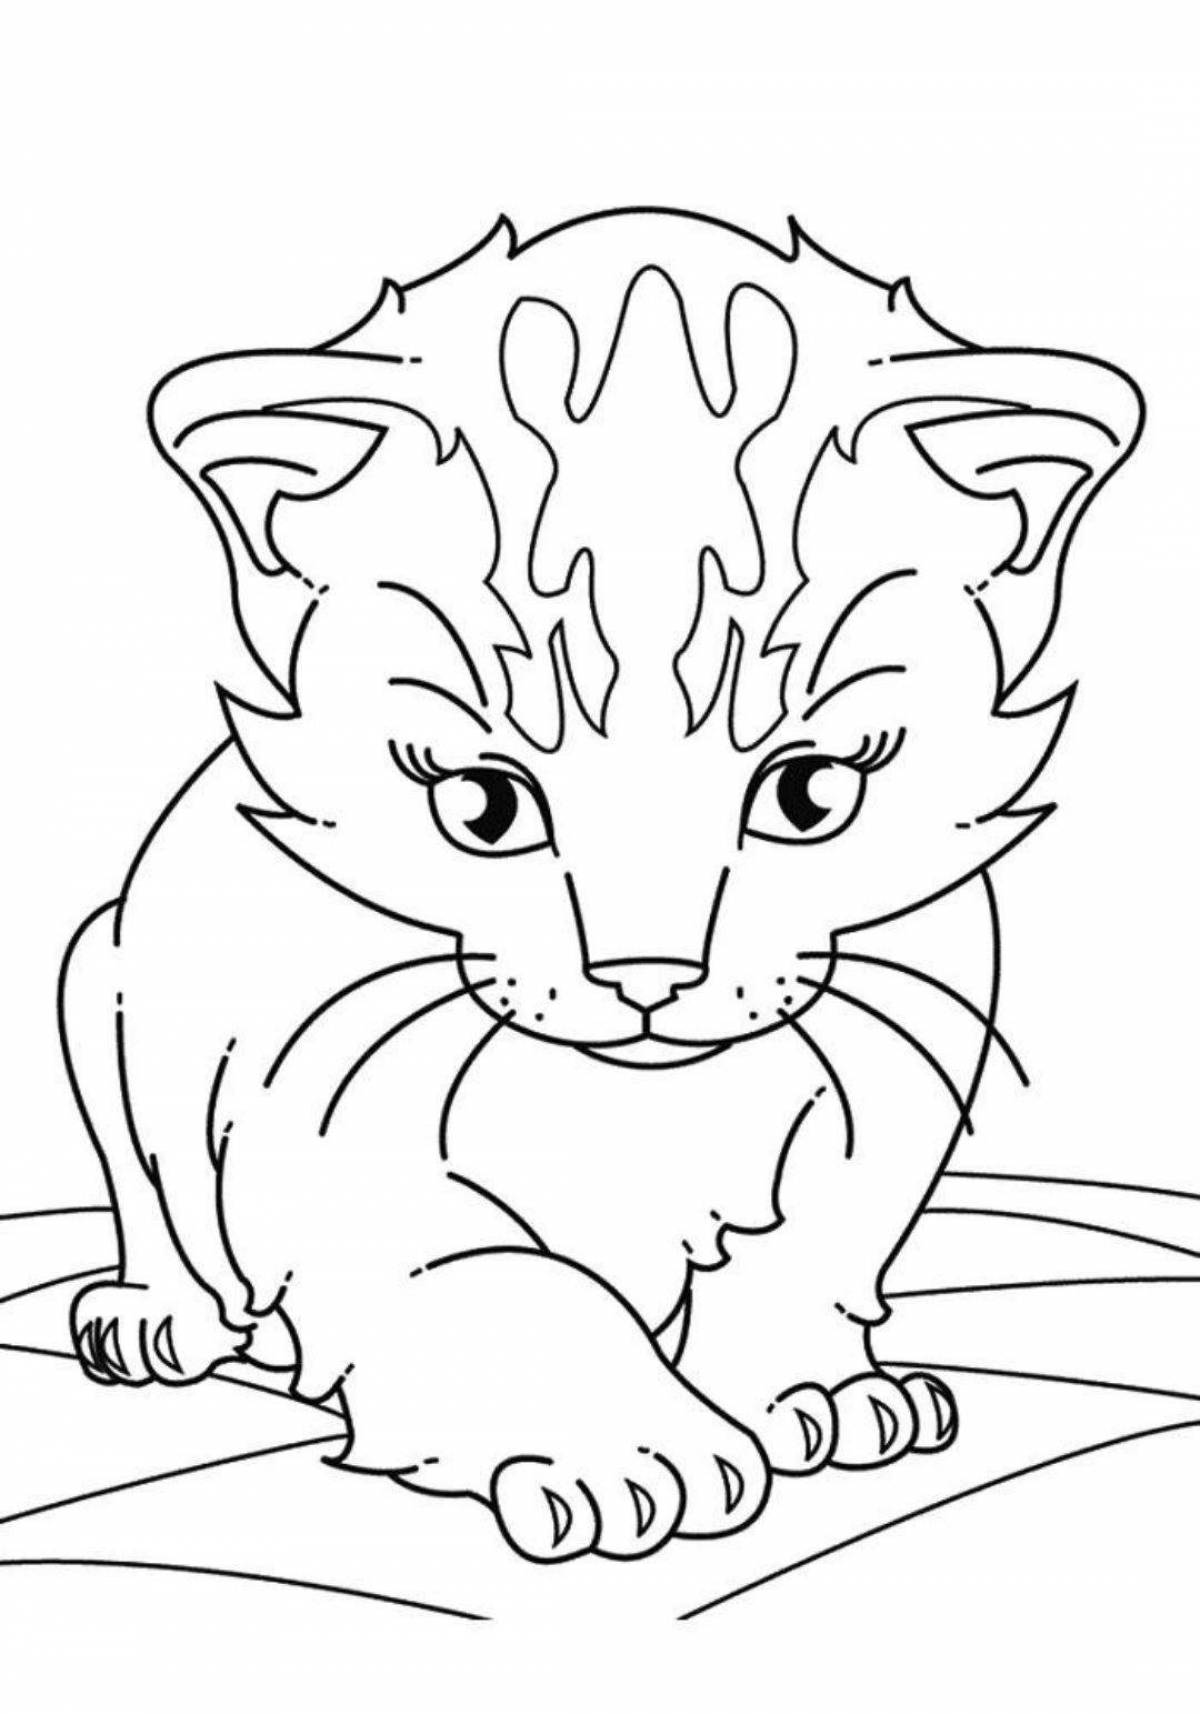 Adorable animal coloring book for 10 year olds